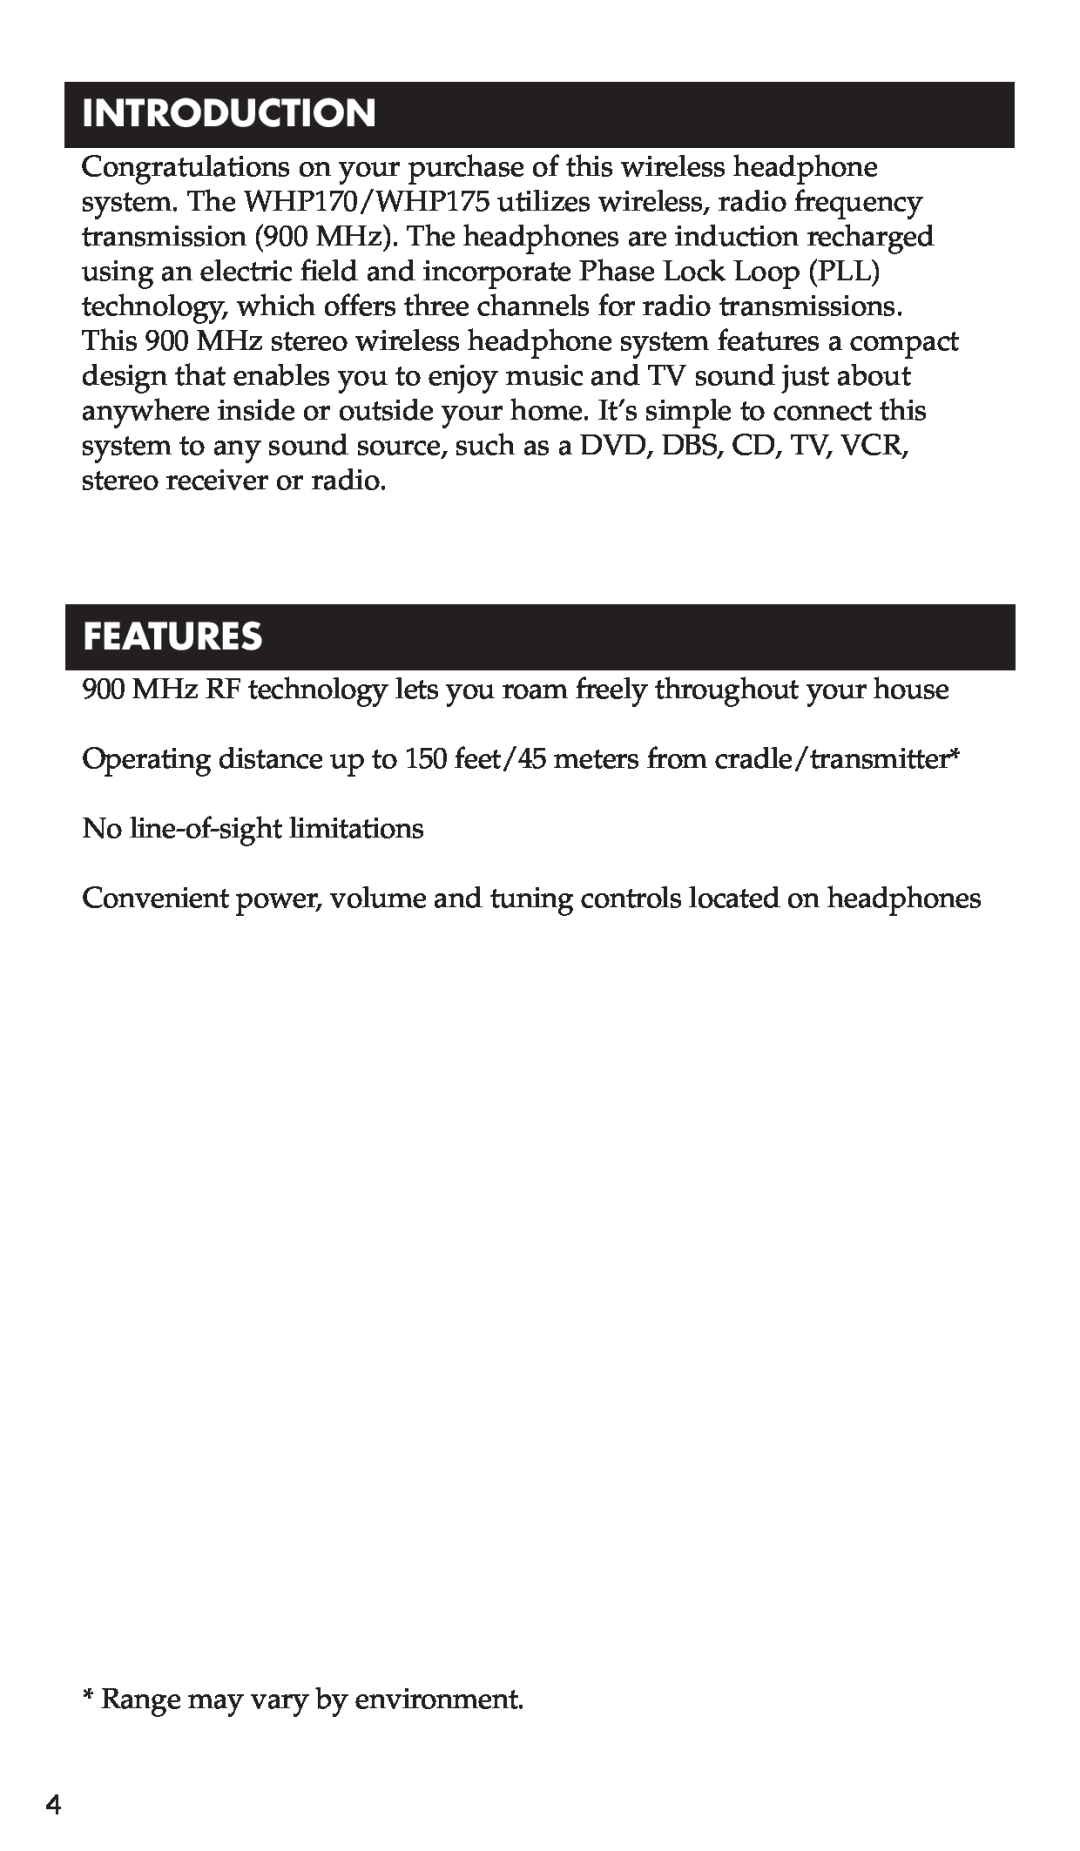 RCA WHP175, WHP170 manual Introduction, Features 